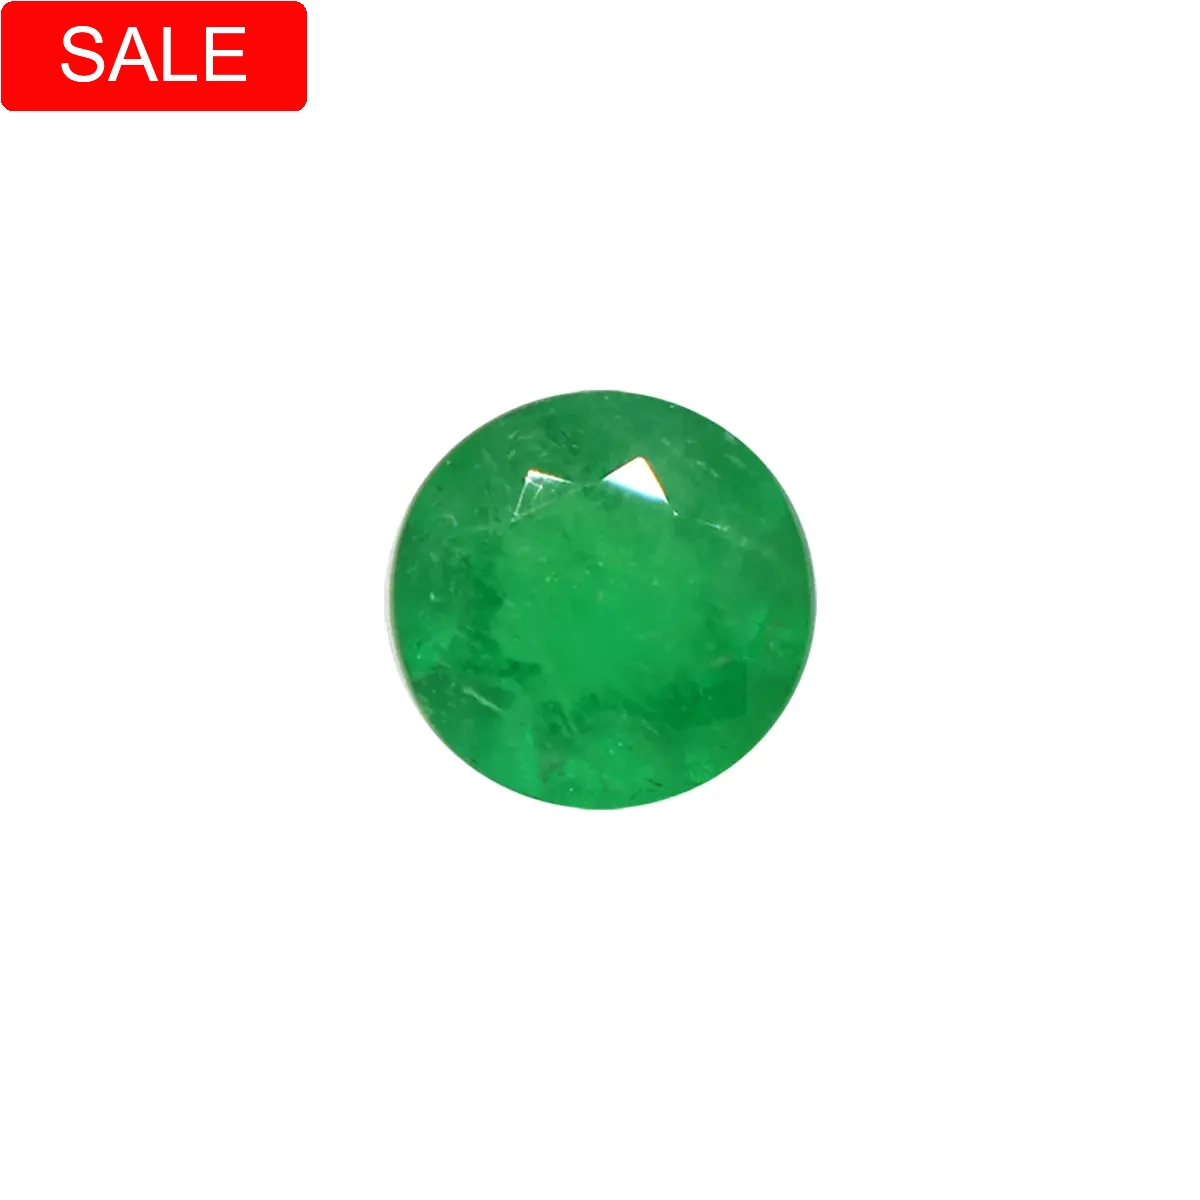 loose-round-cut-natural-colombian-emerald